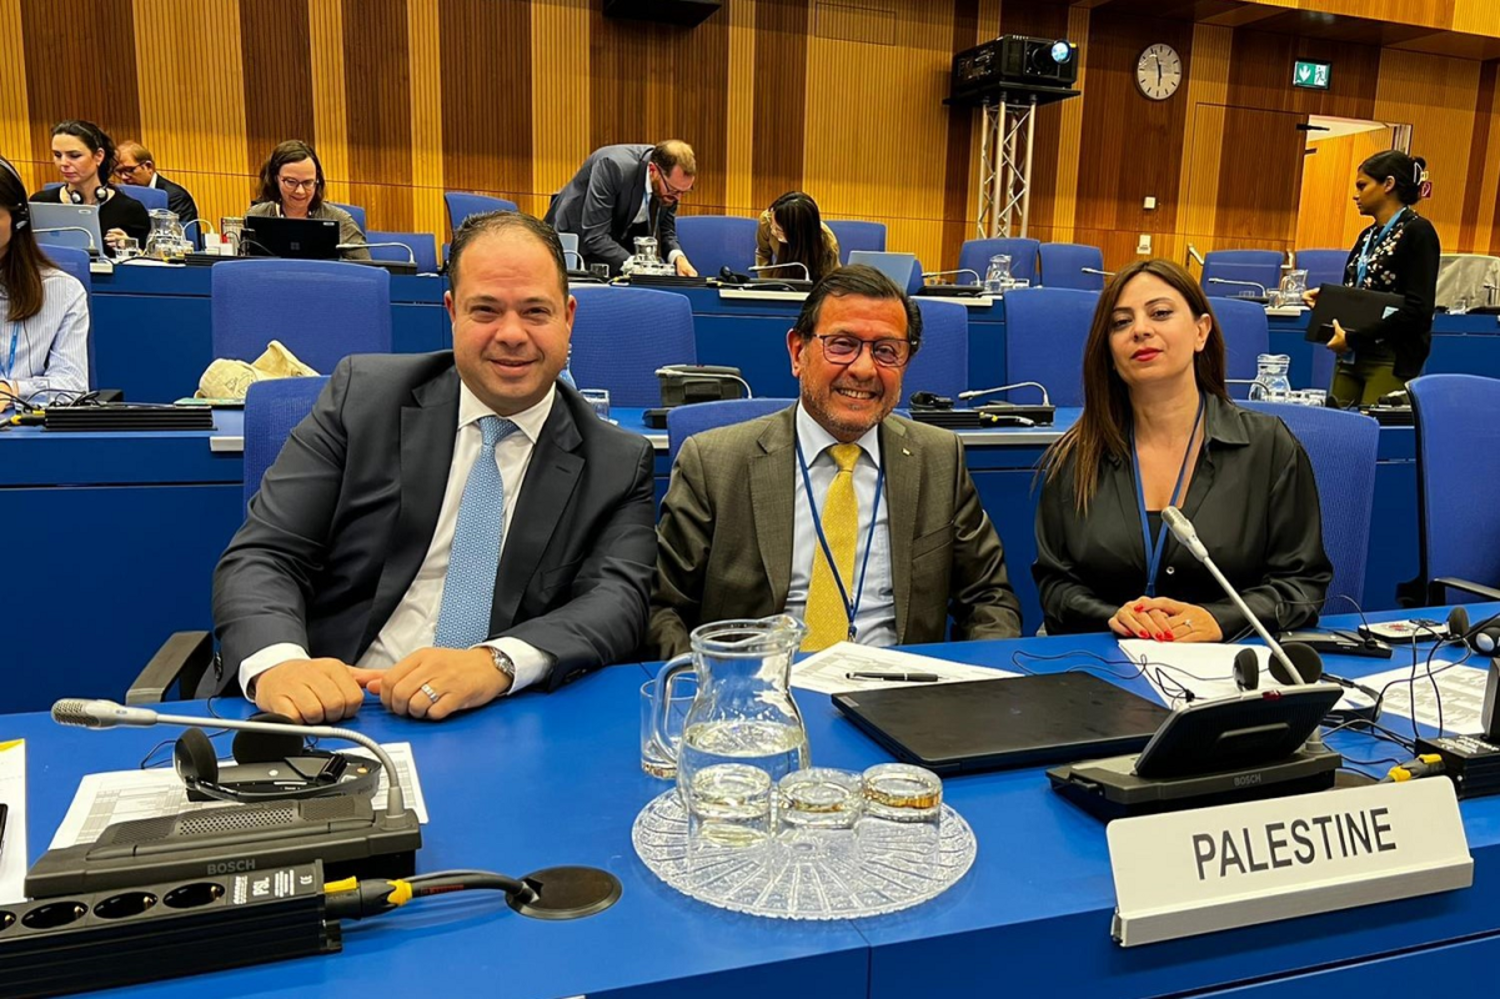 The Palestinian delegation at the IAEA General Conference